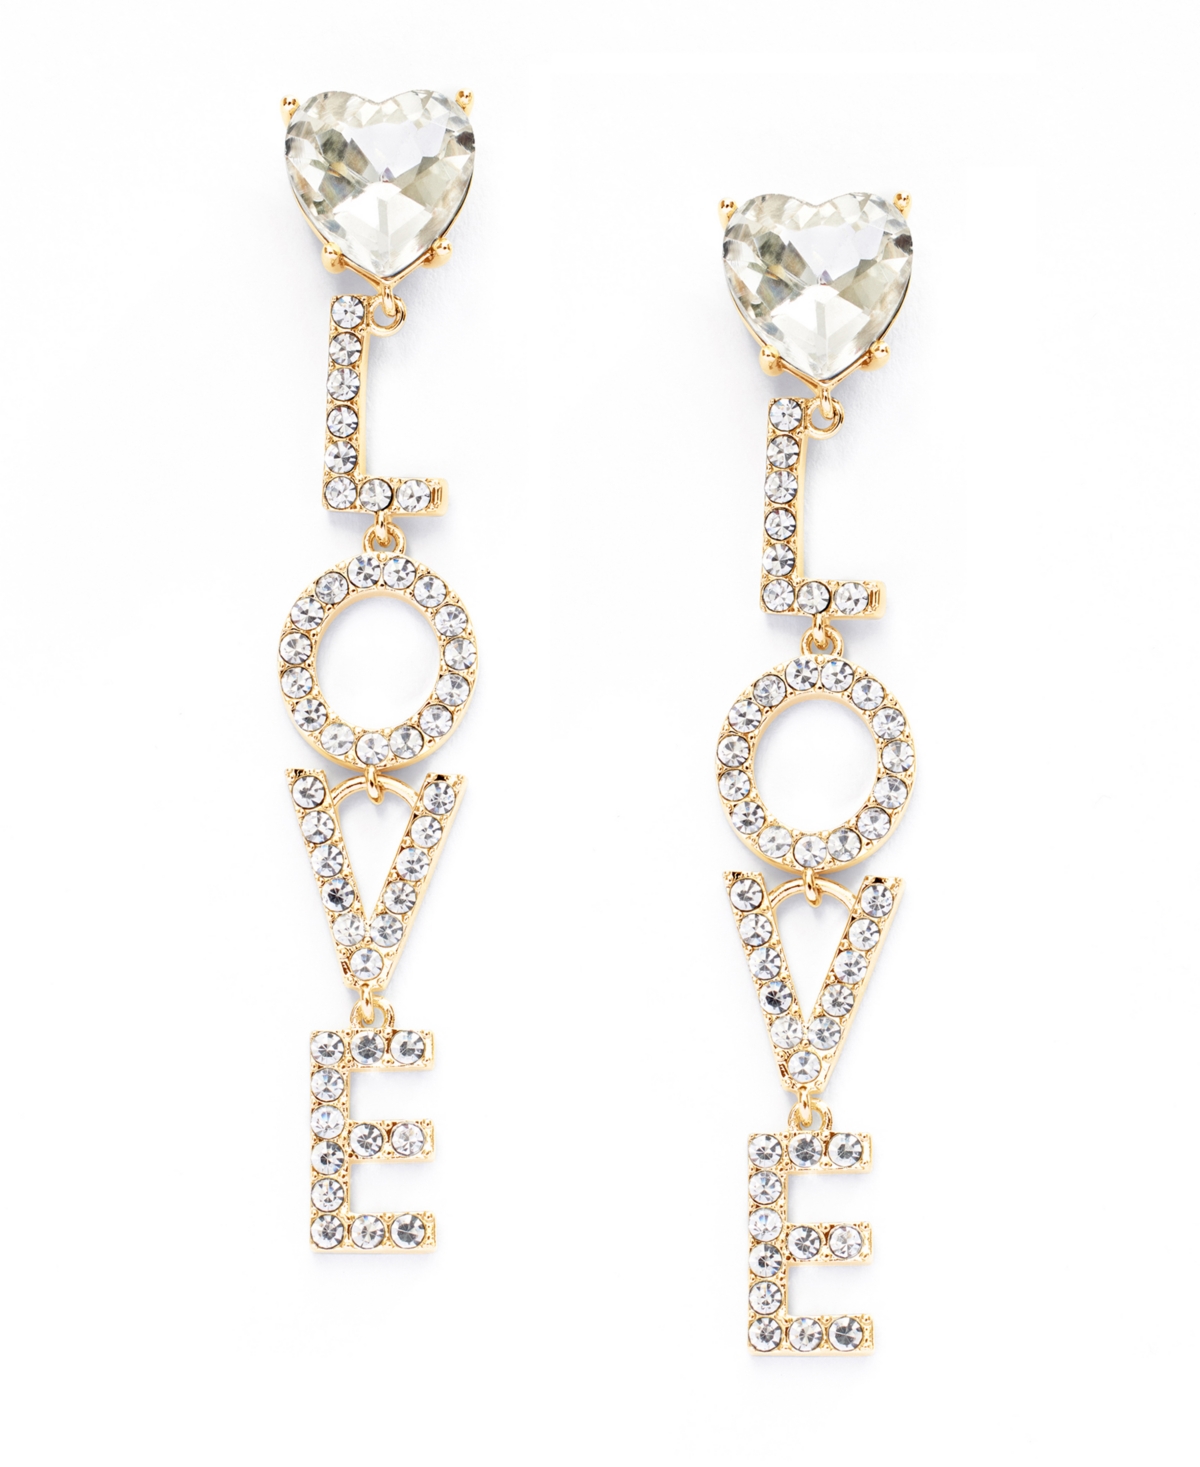 Faux Stone Pave Love Statement Drop Earrings - Crystal, Gold